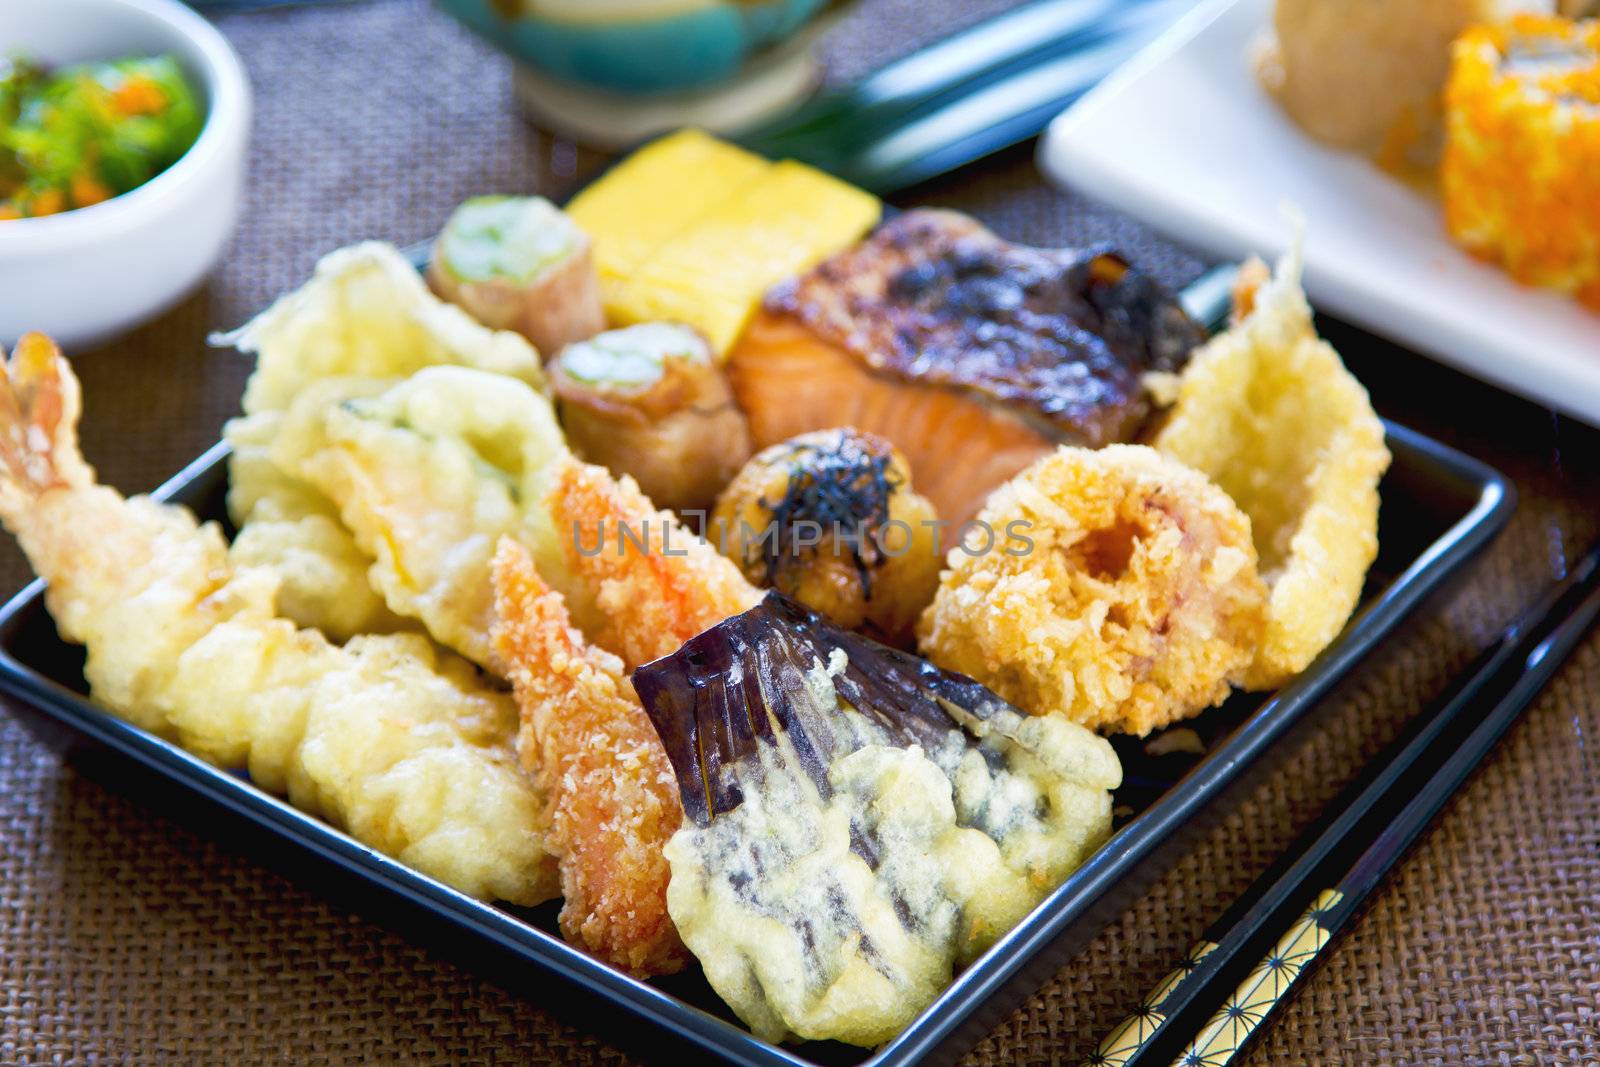 Japanese Bento set contain varieties of vegetables and fish in batter with Nori maki